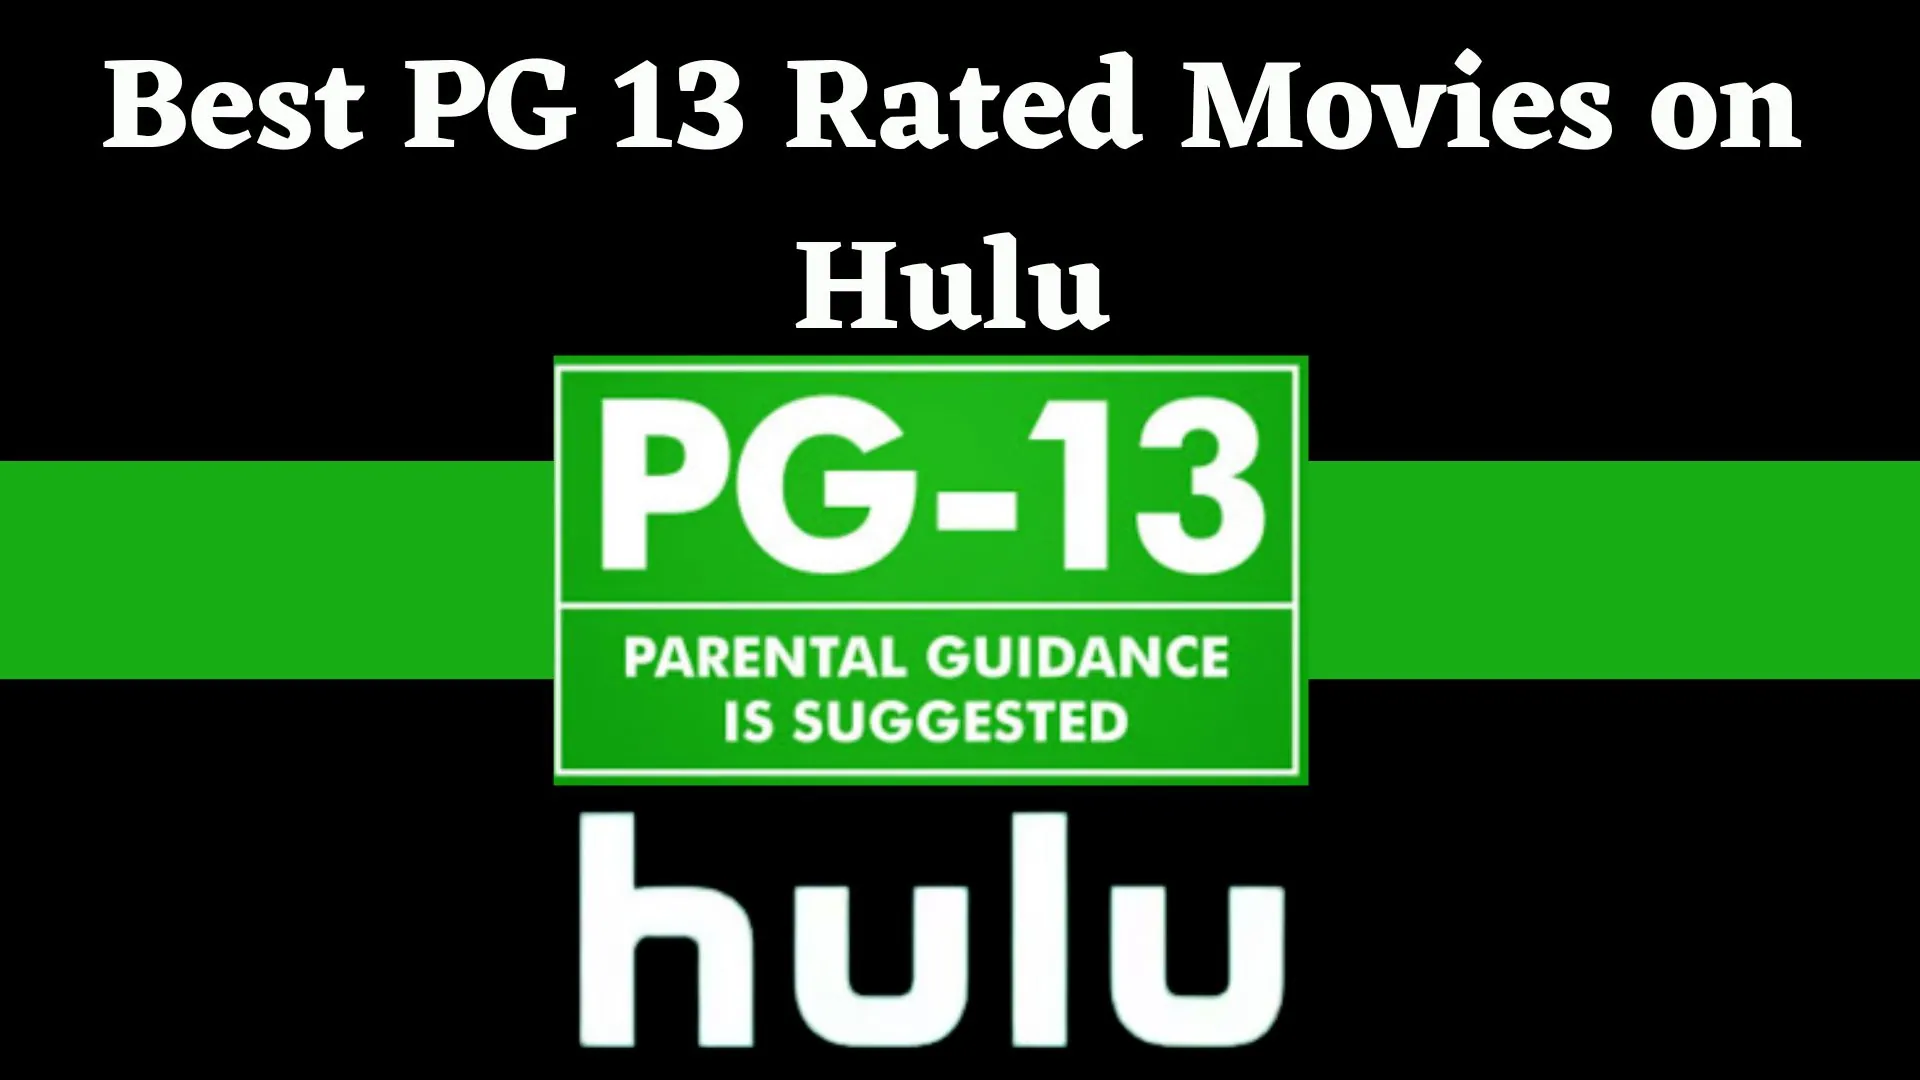 Best PG 13 Rated Movies on Hulu